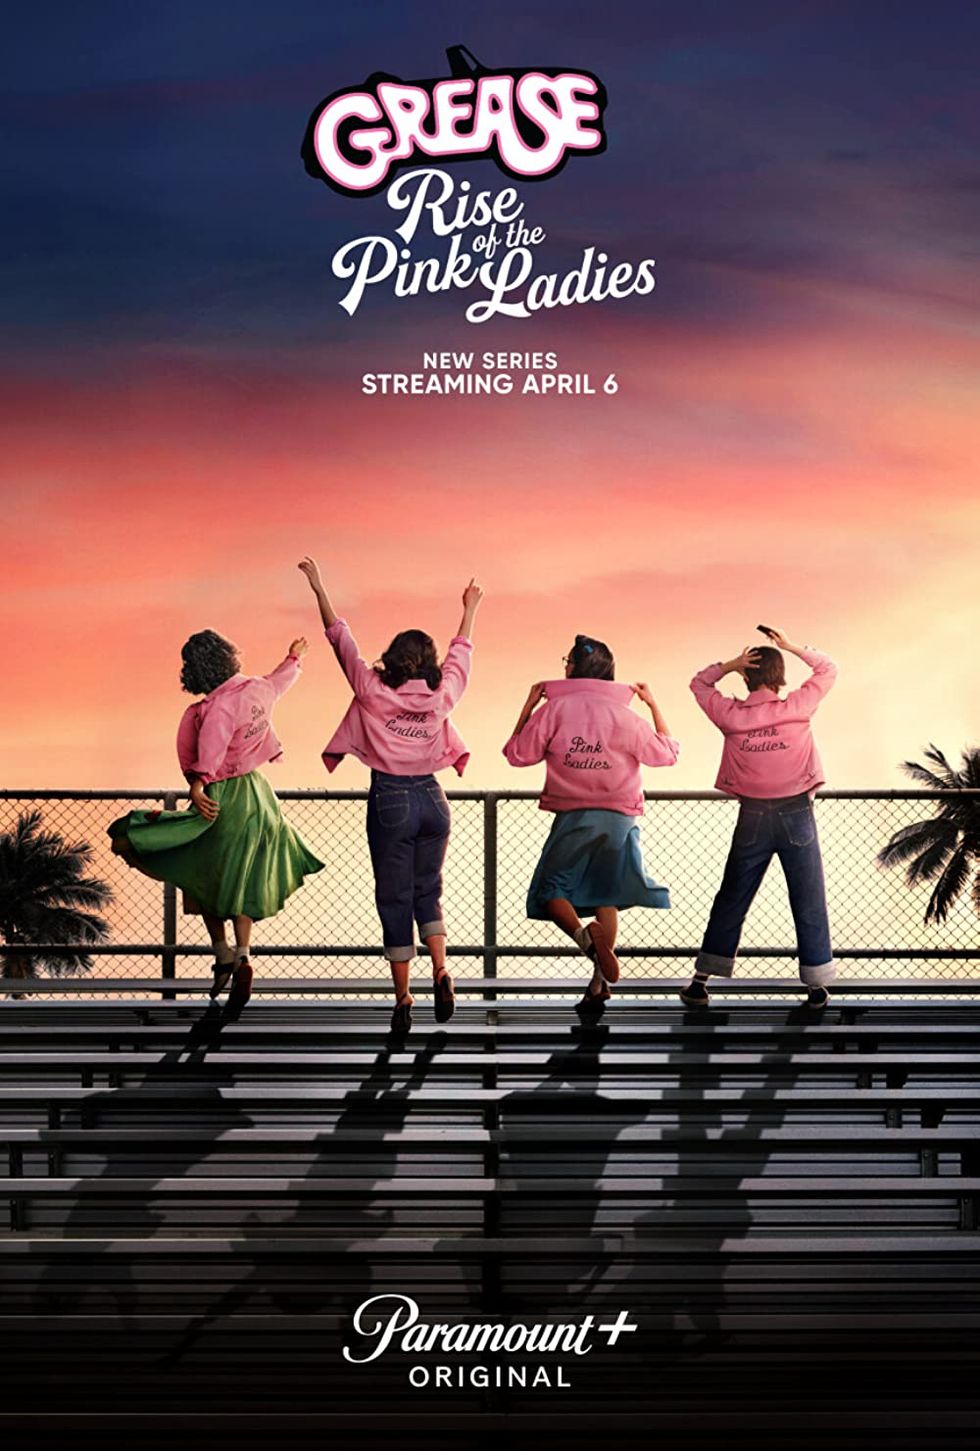 póster oficial de 'grease rise of the pink ladies'